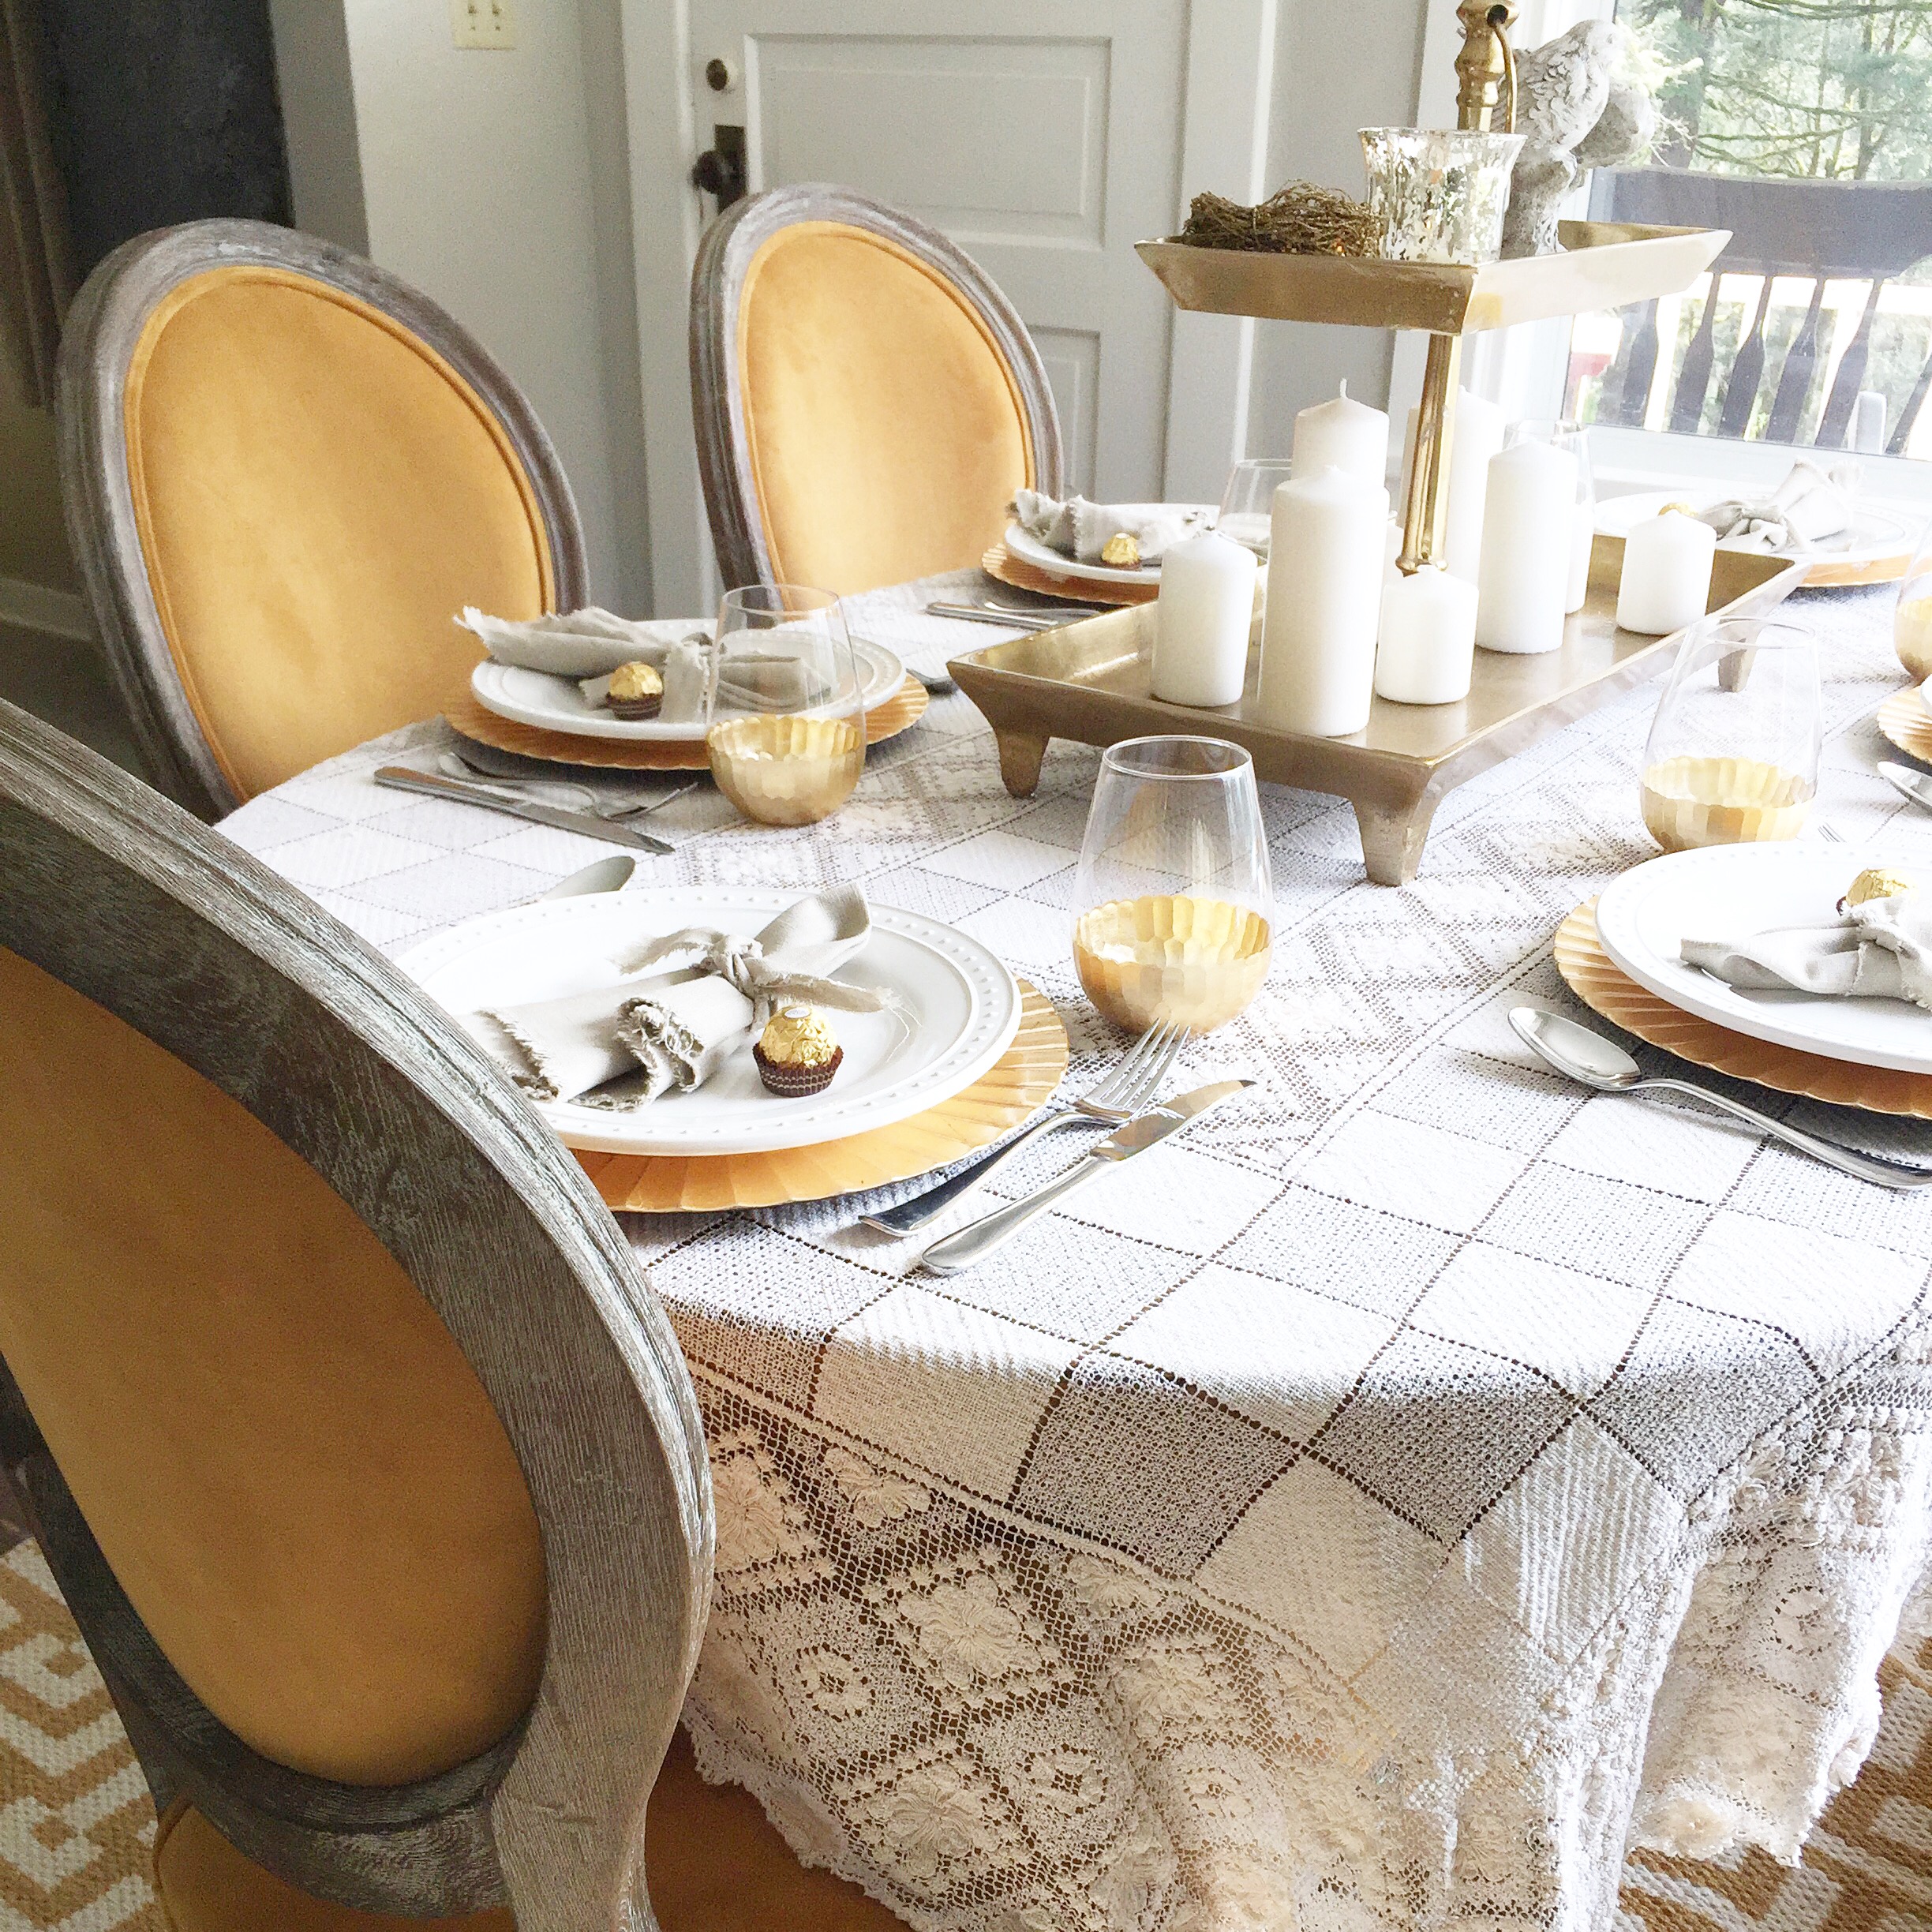 5 Easy Tips for Styling Your Dining Room Like a Pro